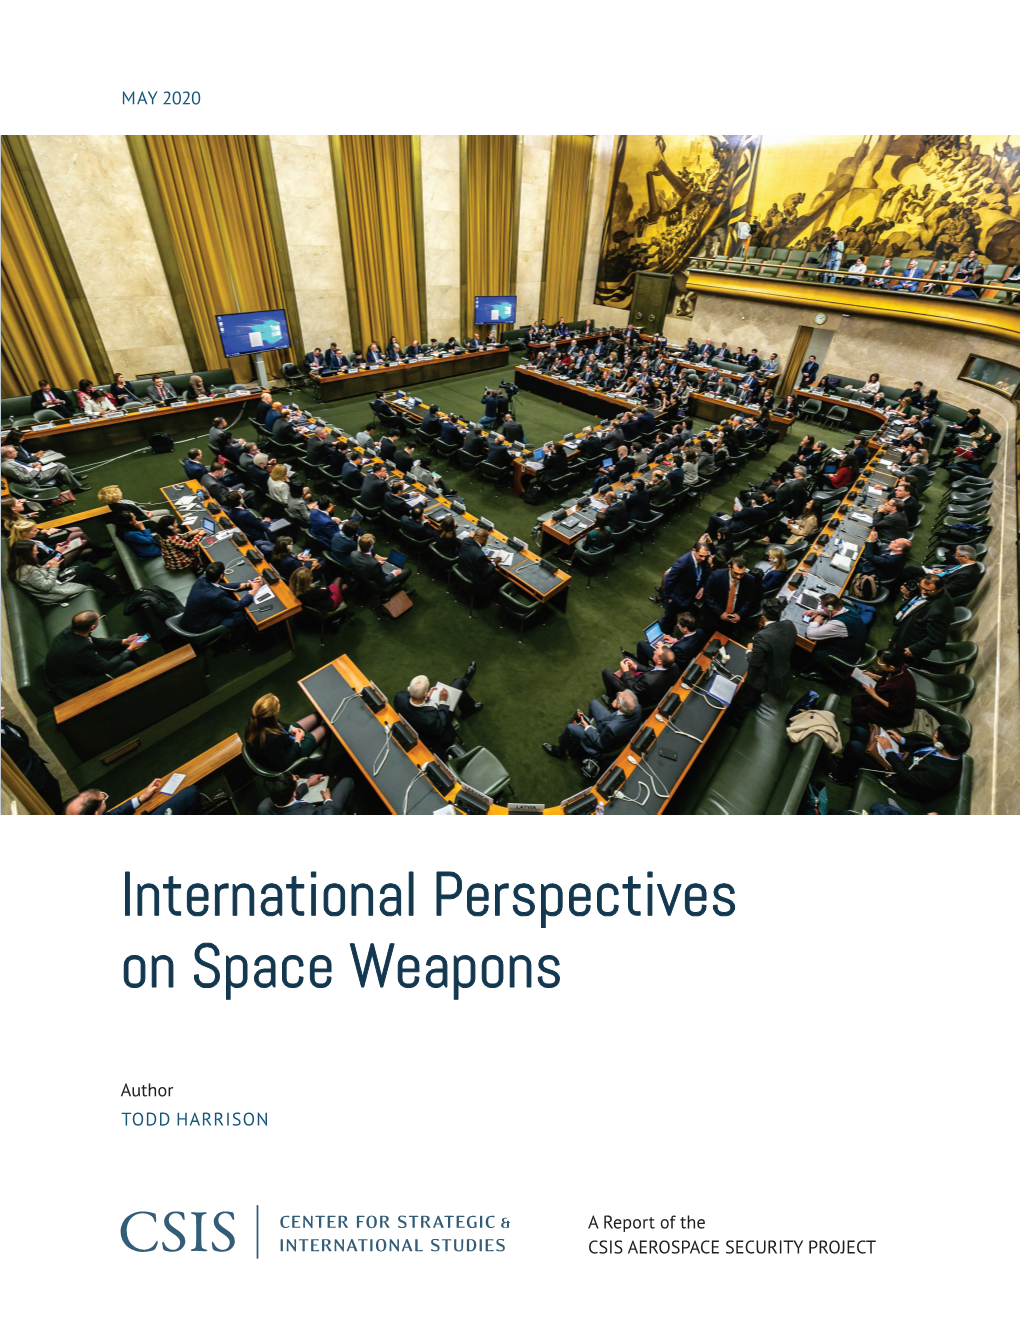 International Perspectives on Space Weapons